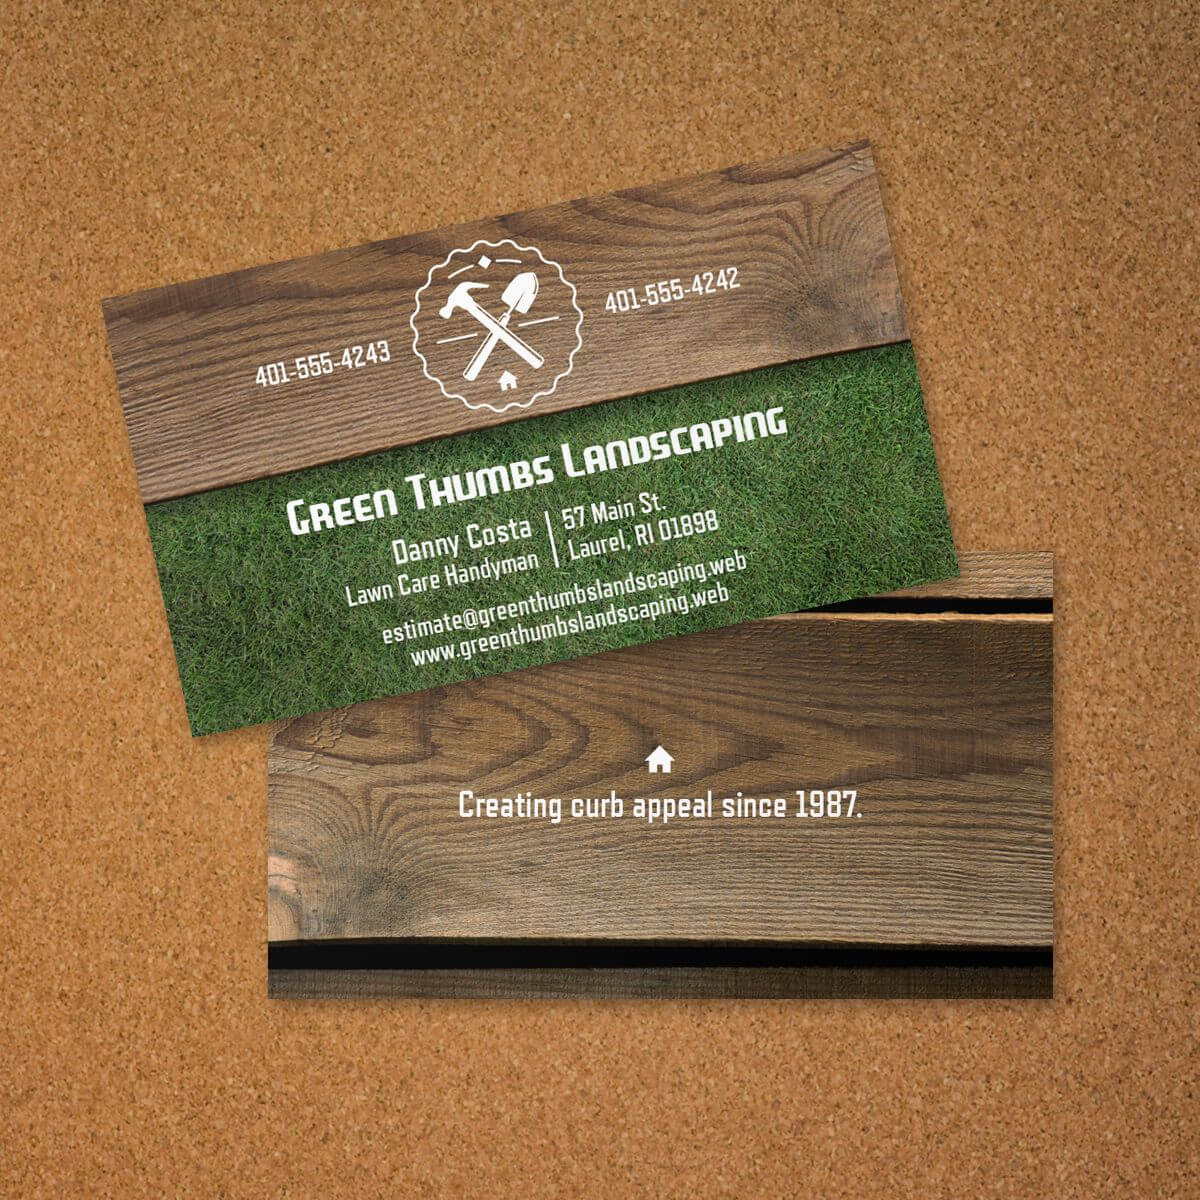 What's Out There. . . Landscaping Business Card | Ludwig Throughout Lawn Care Business Cards Templates Free